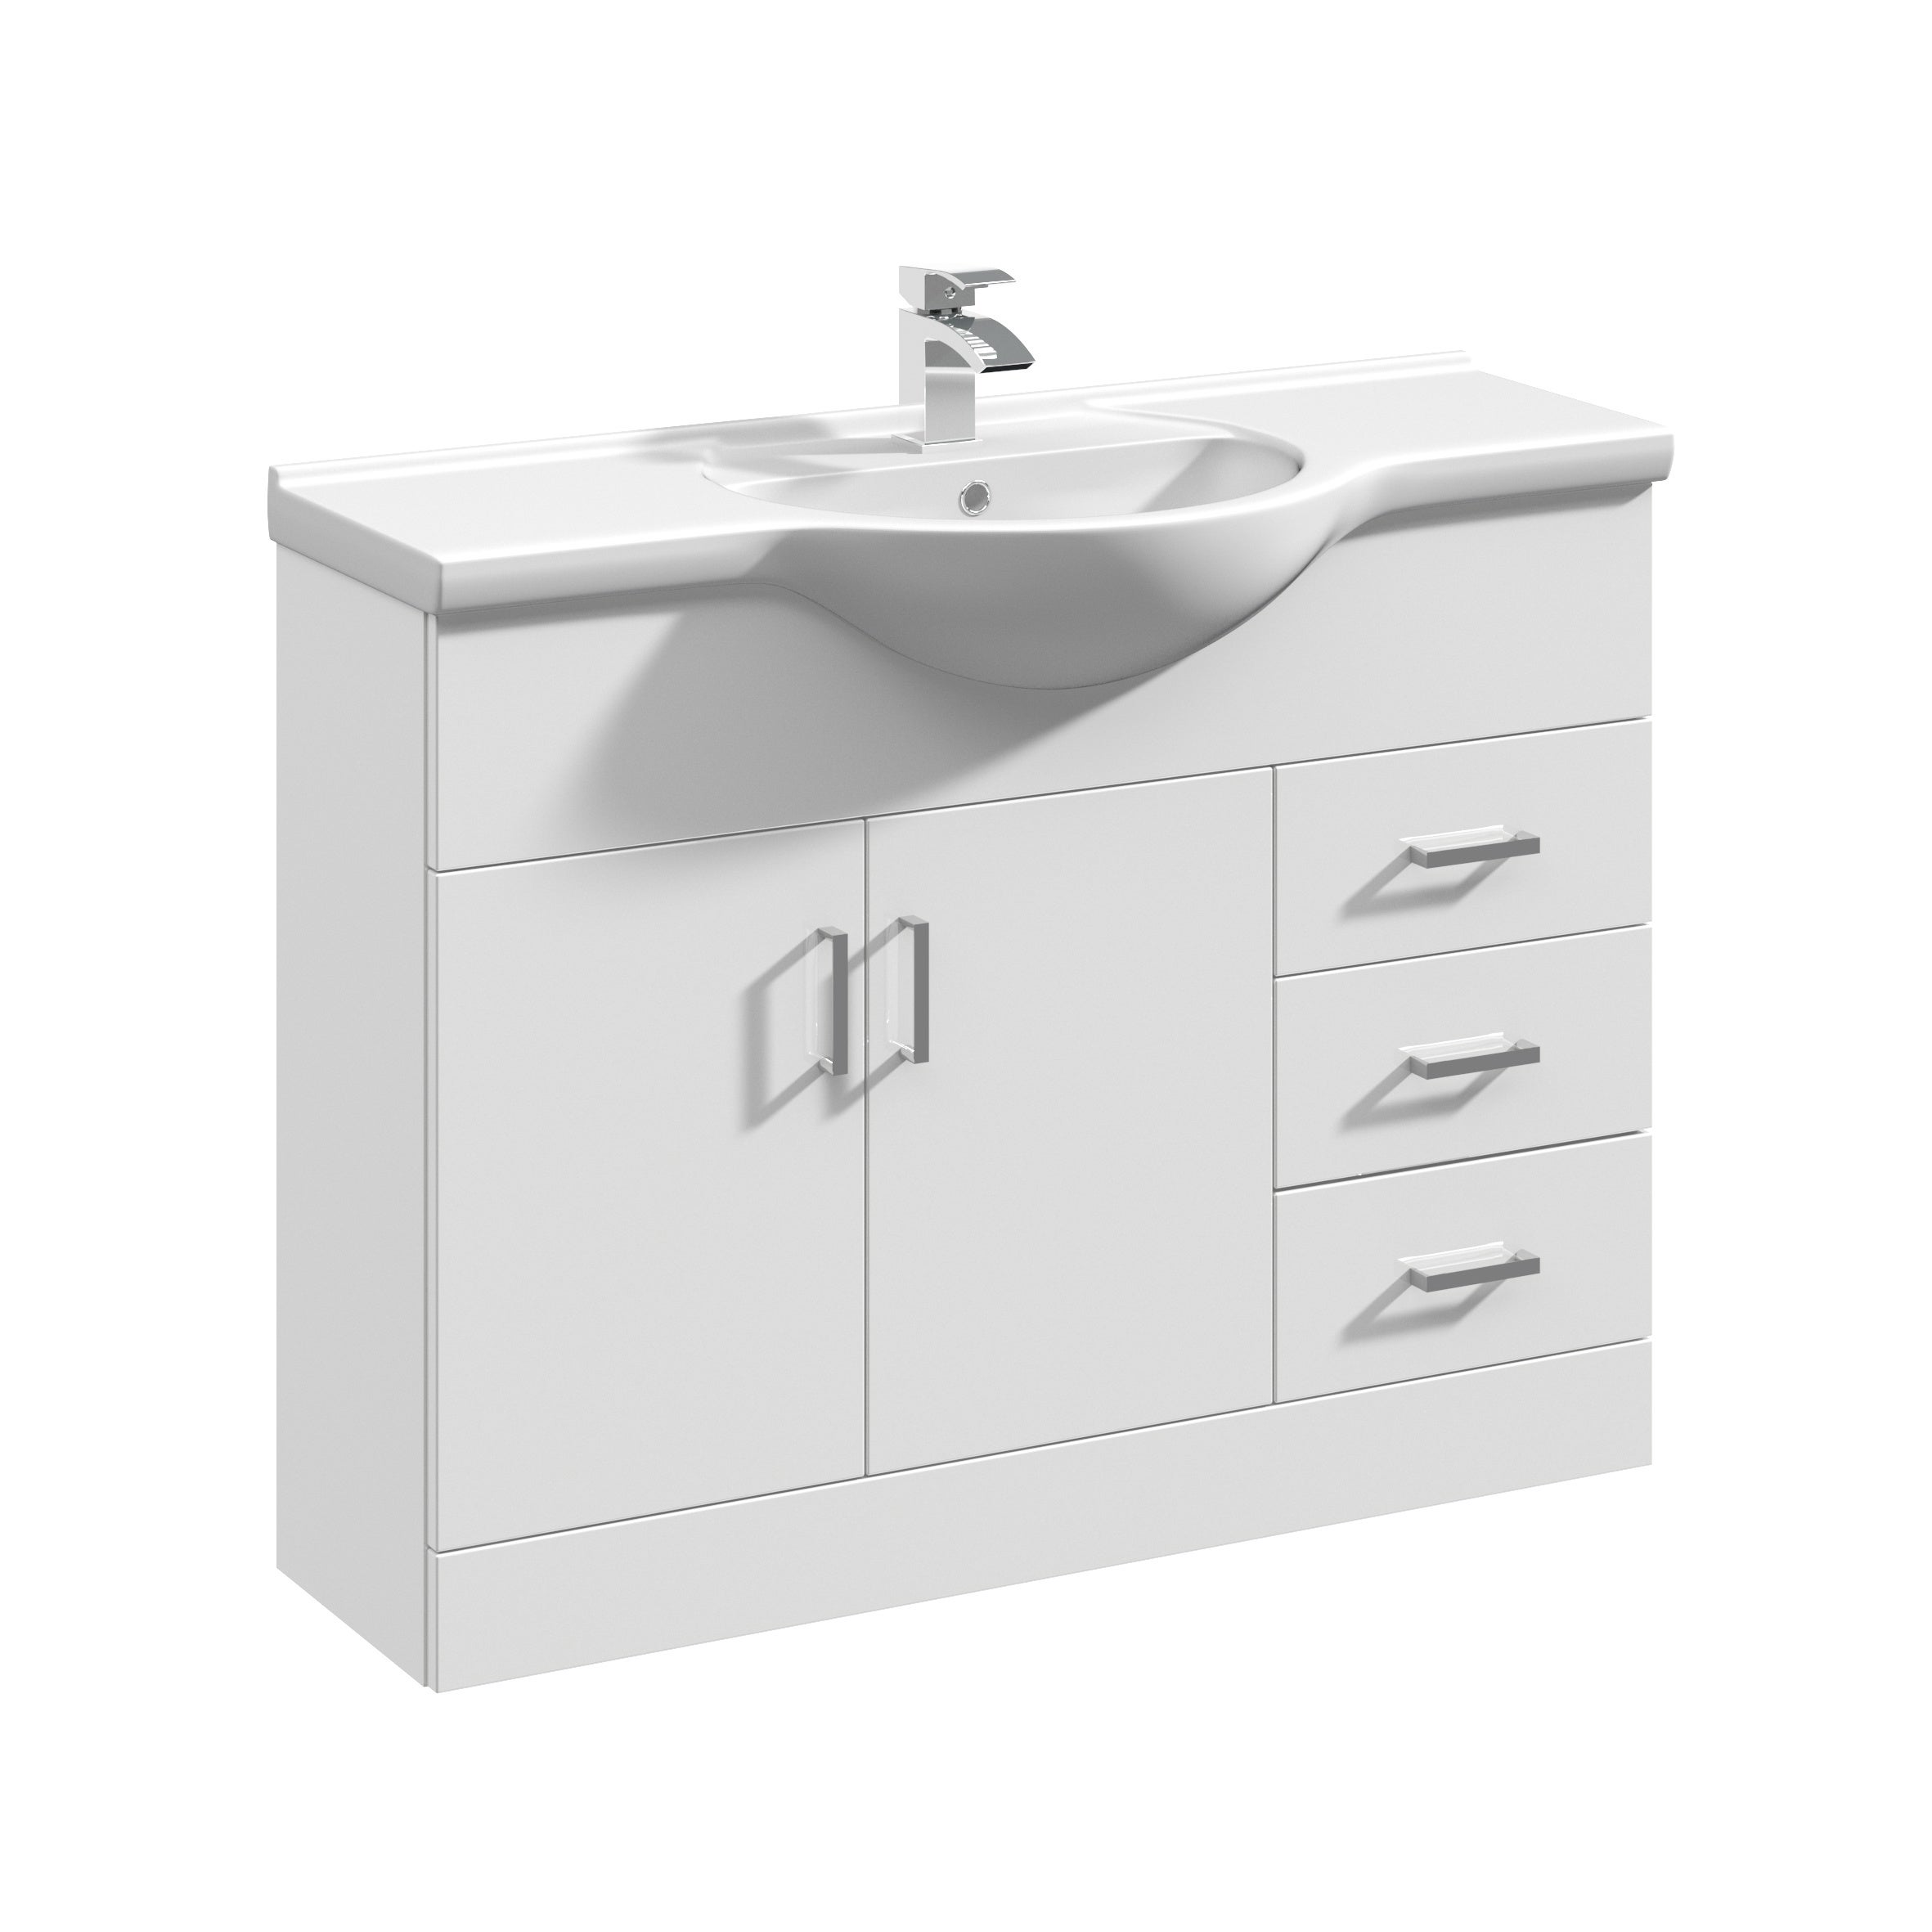 Mayford 3 Drawer 2 Door Wall Mounted Basin Gloss White